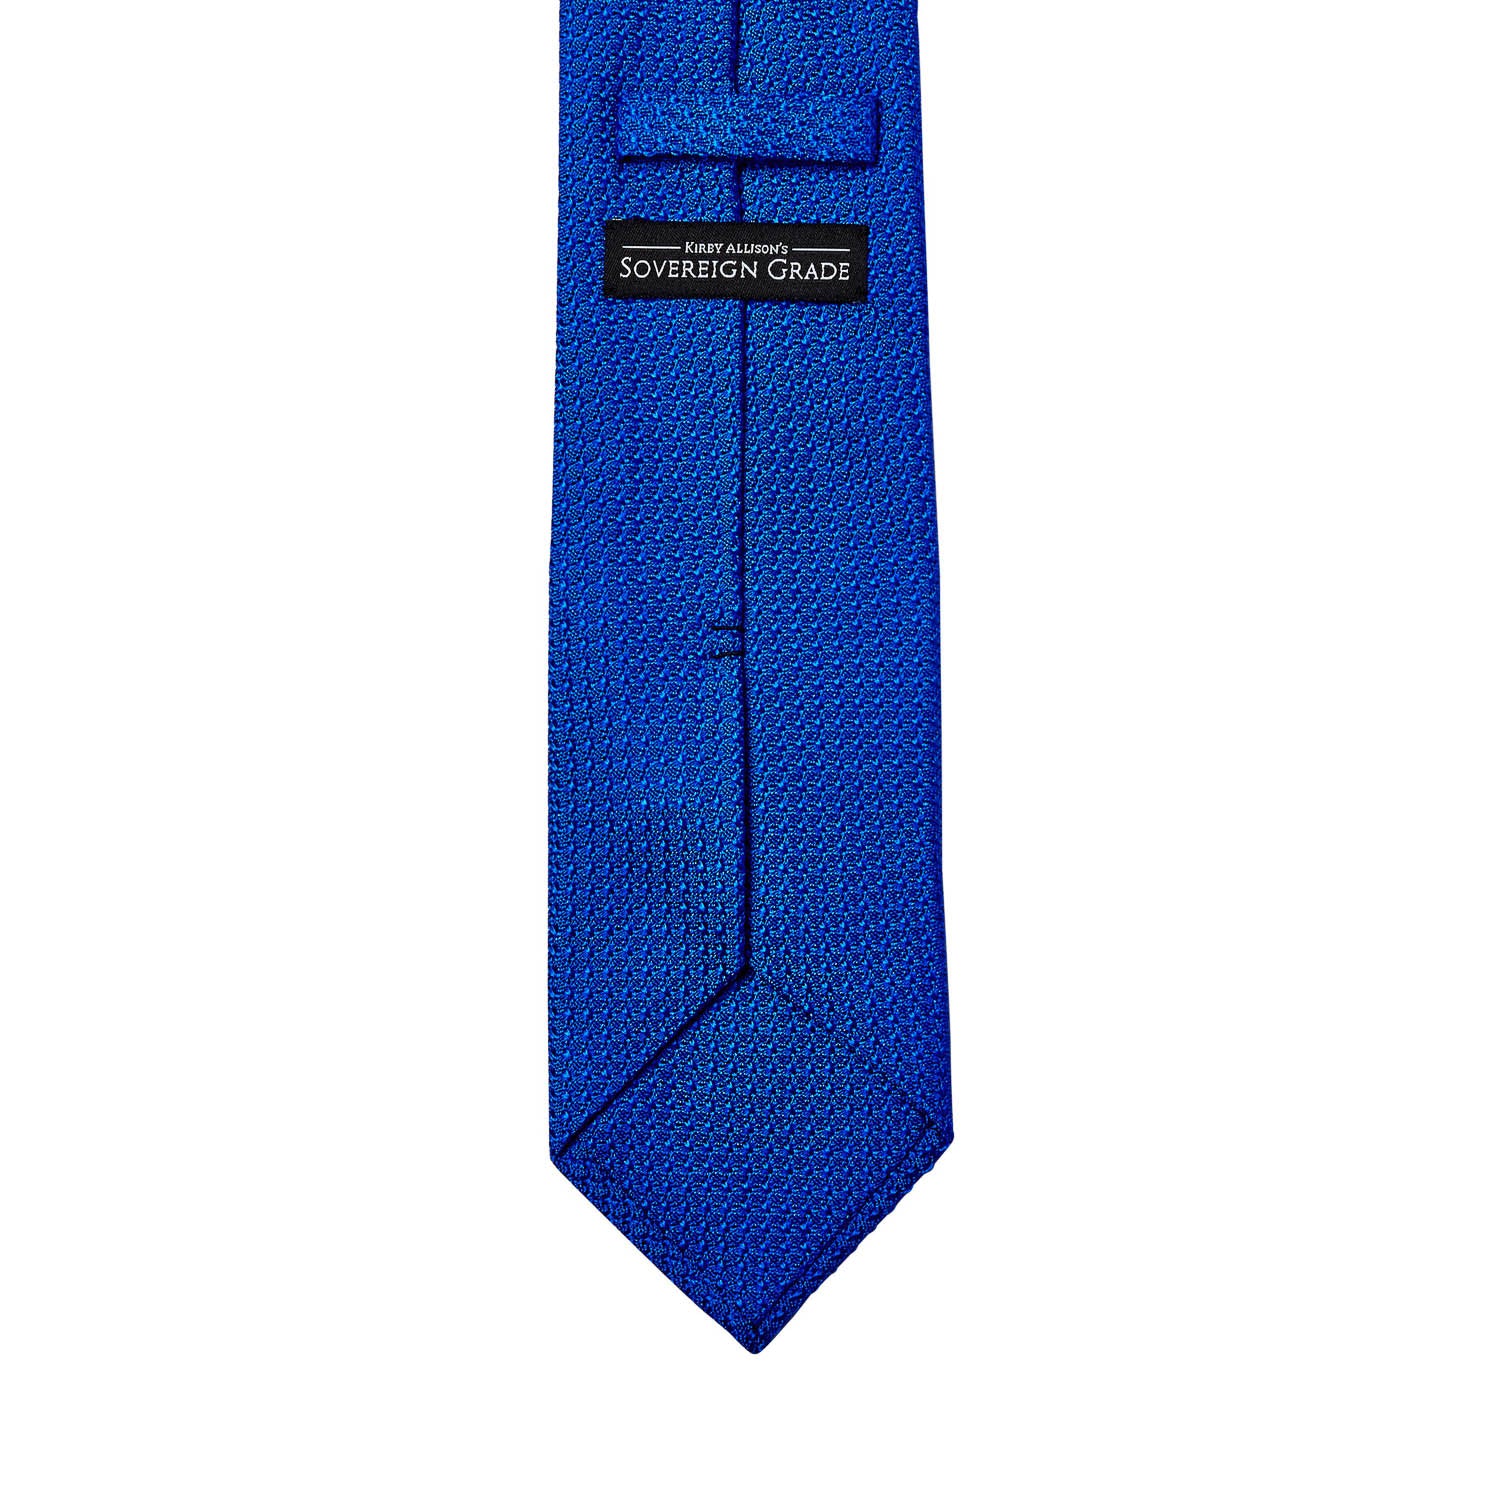 A bright blue Sovereign Grade Grenadine Grossa tie handmade in the United Kingdom, known for its longevity and quality, on a white background, by KirbyAllison.com.